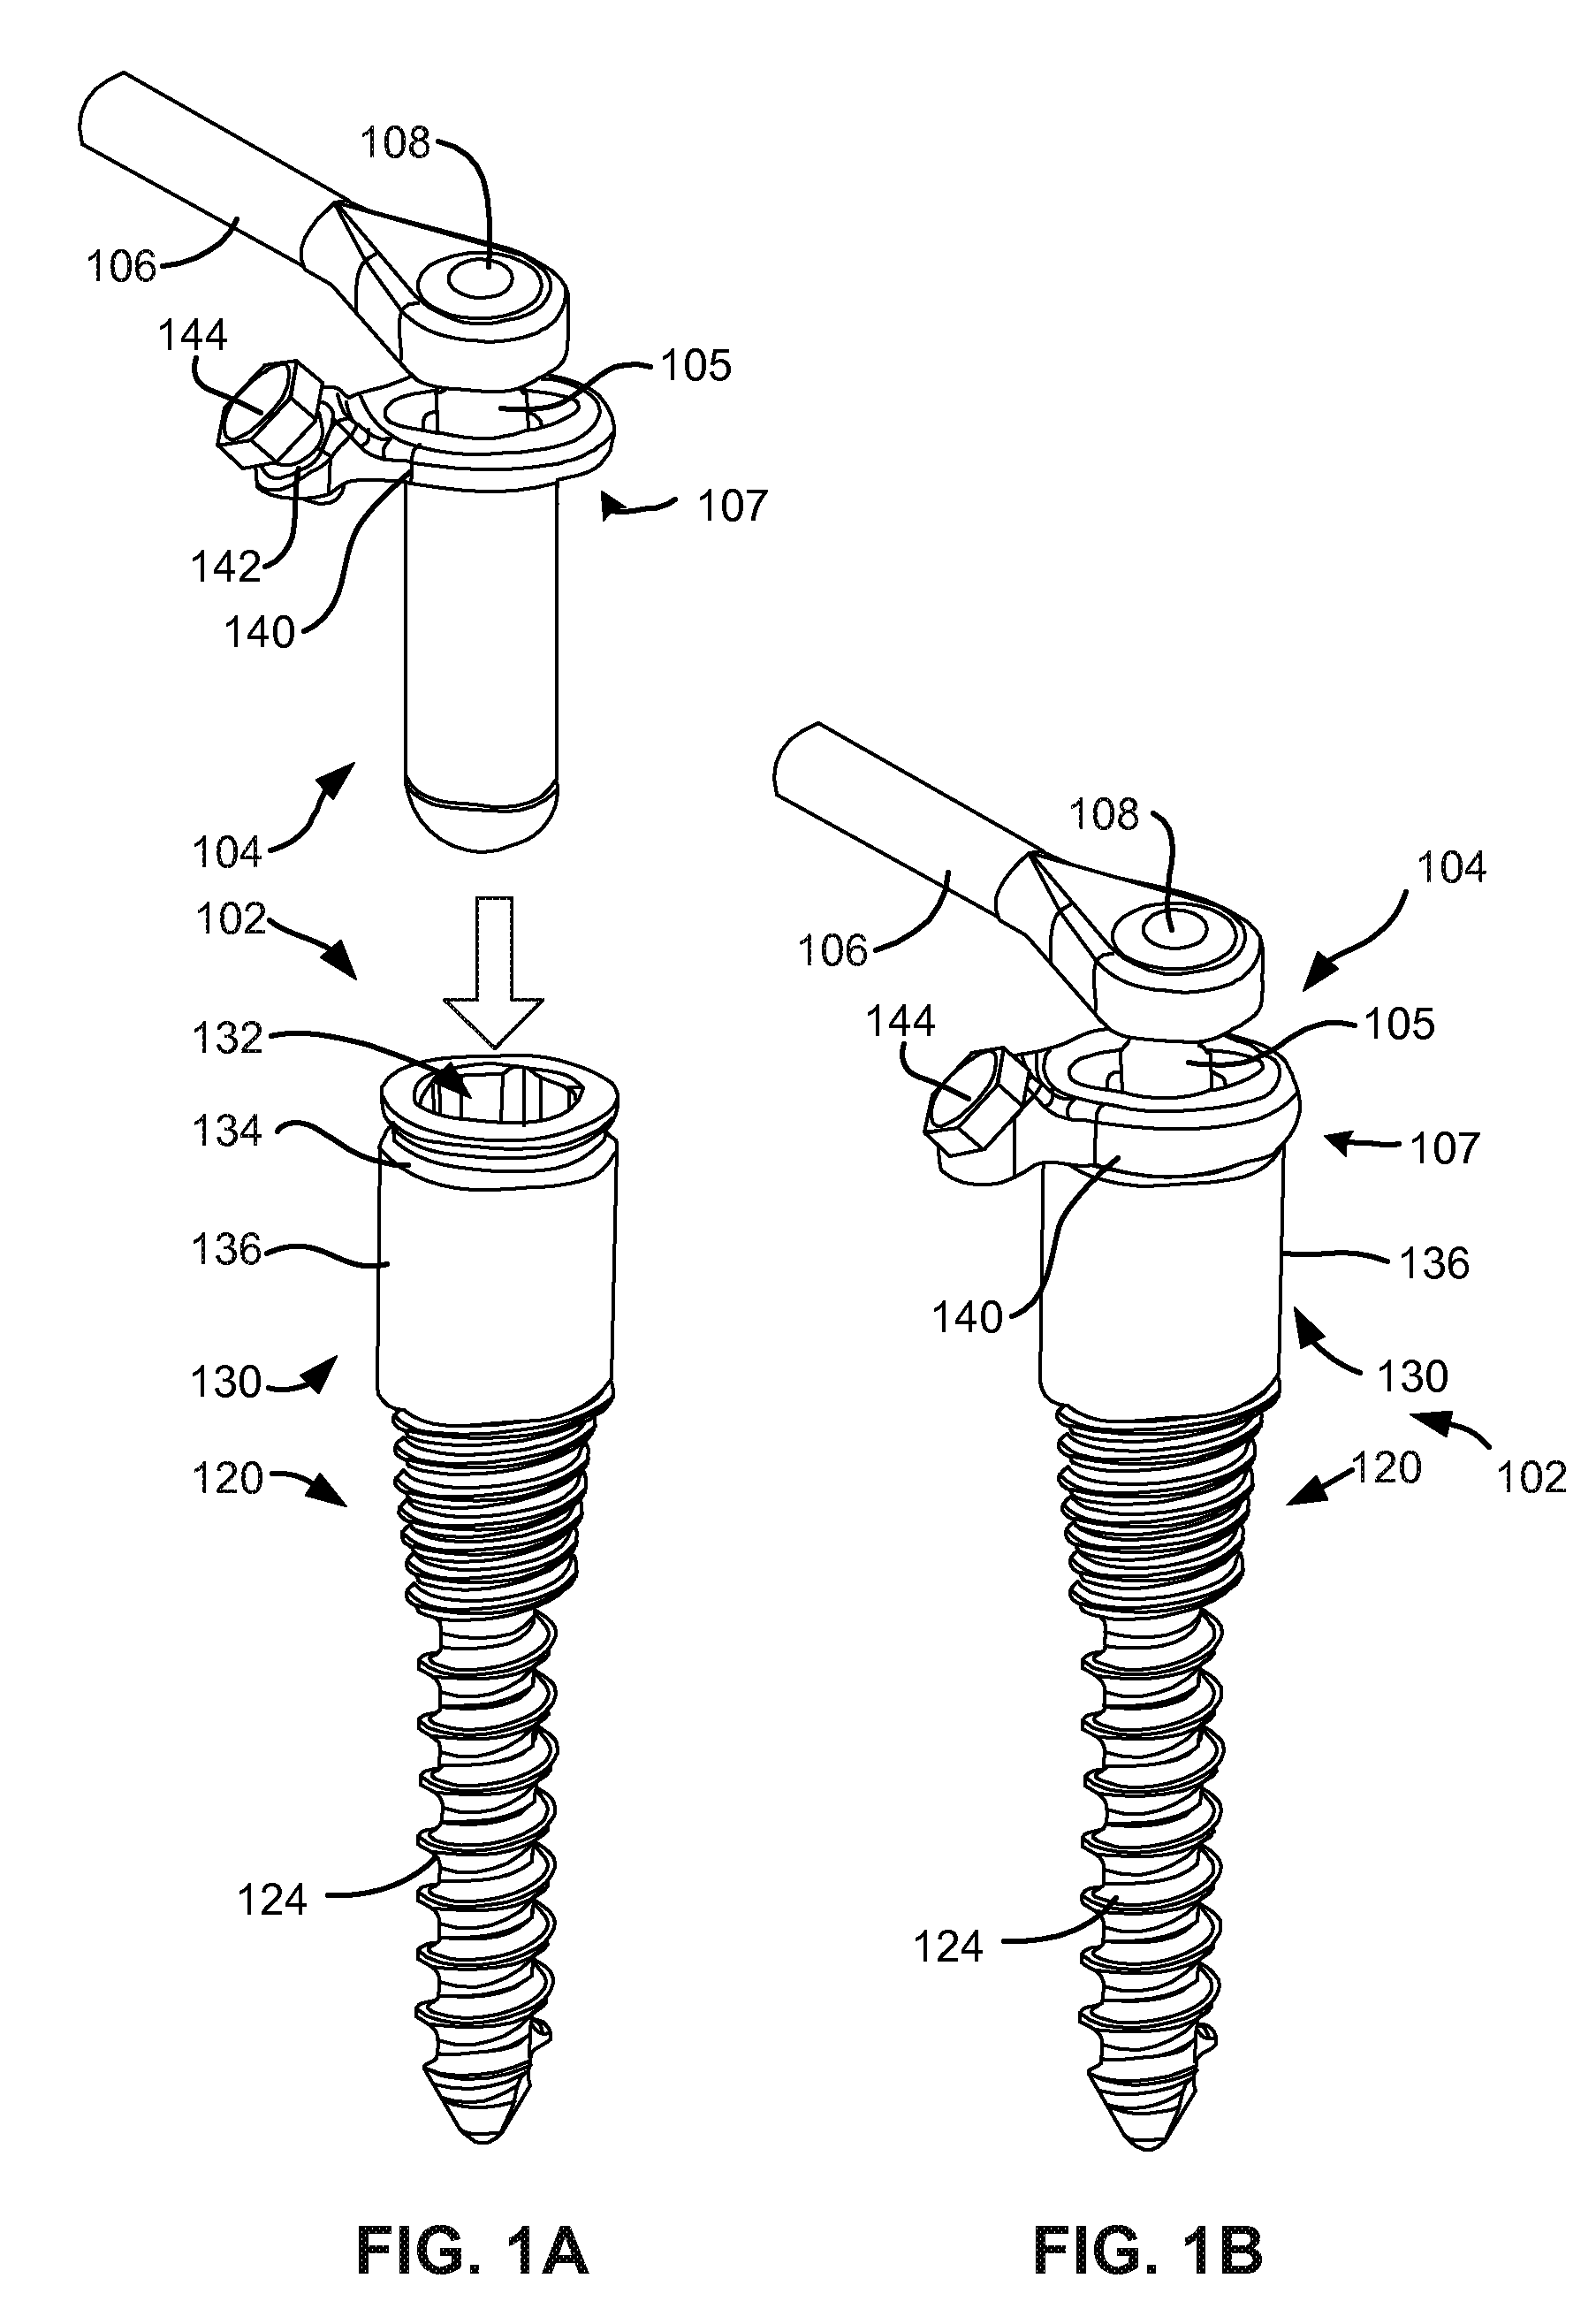 Dynamic spinal rod assembly and method for dynamic stabilization of the spine